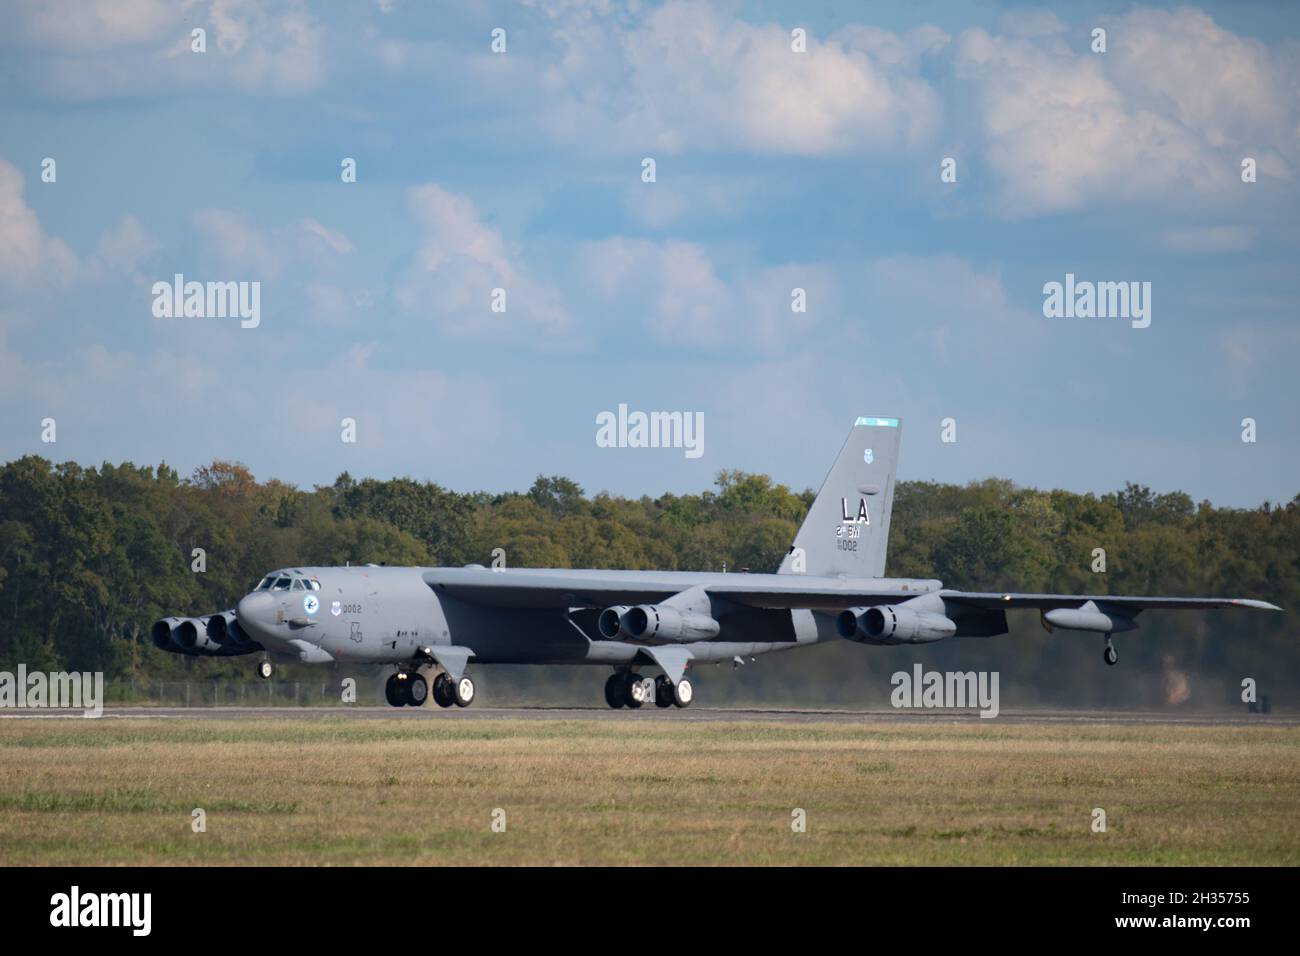 A B-52H Stratofortress takes off from Barksdale Air Force Base, Louisiana, Oct. 21, 2021. Maintenance teams, aircrew, and Airmen across the 2nd Bomb Wing participated in a readiness exercise to showcase nuclear combat capability. (U.S. Air Force photo by Staff Sgt. Christopher Tam) Stock Photo